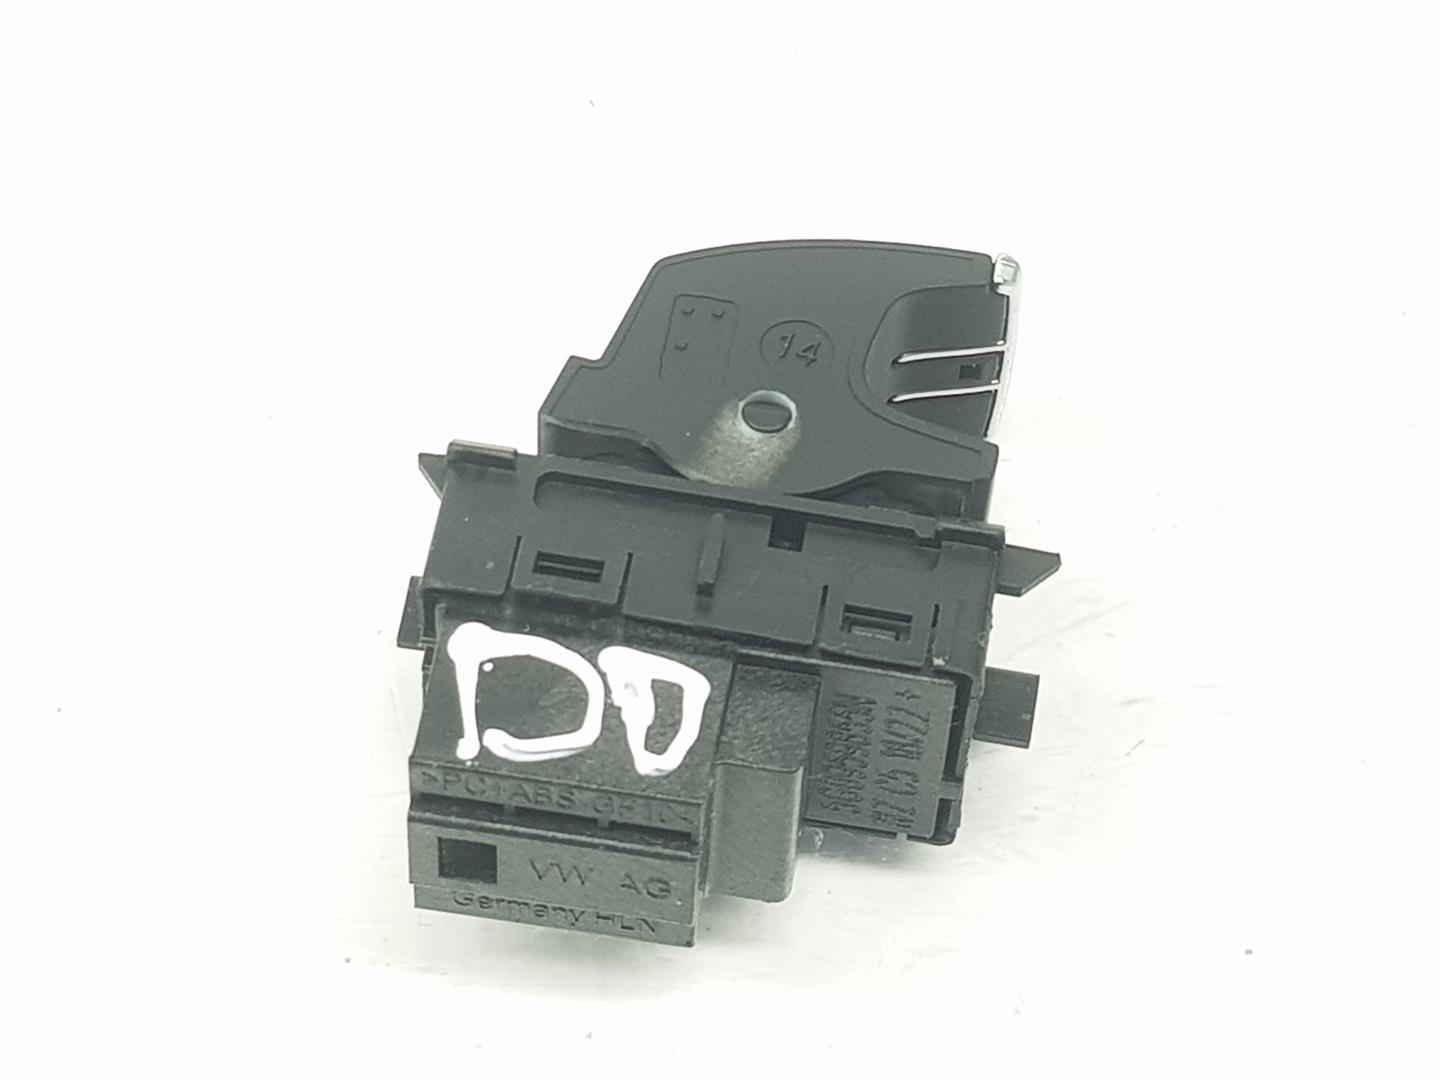 SEAT Alhambra 2 generation (2010-2021) Front Right Door Window Switch 5G0959855N, 5G0959855N 19925479